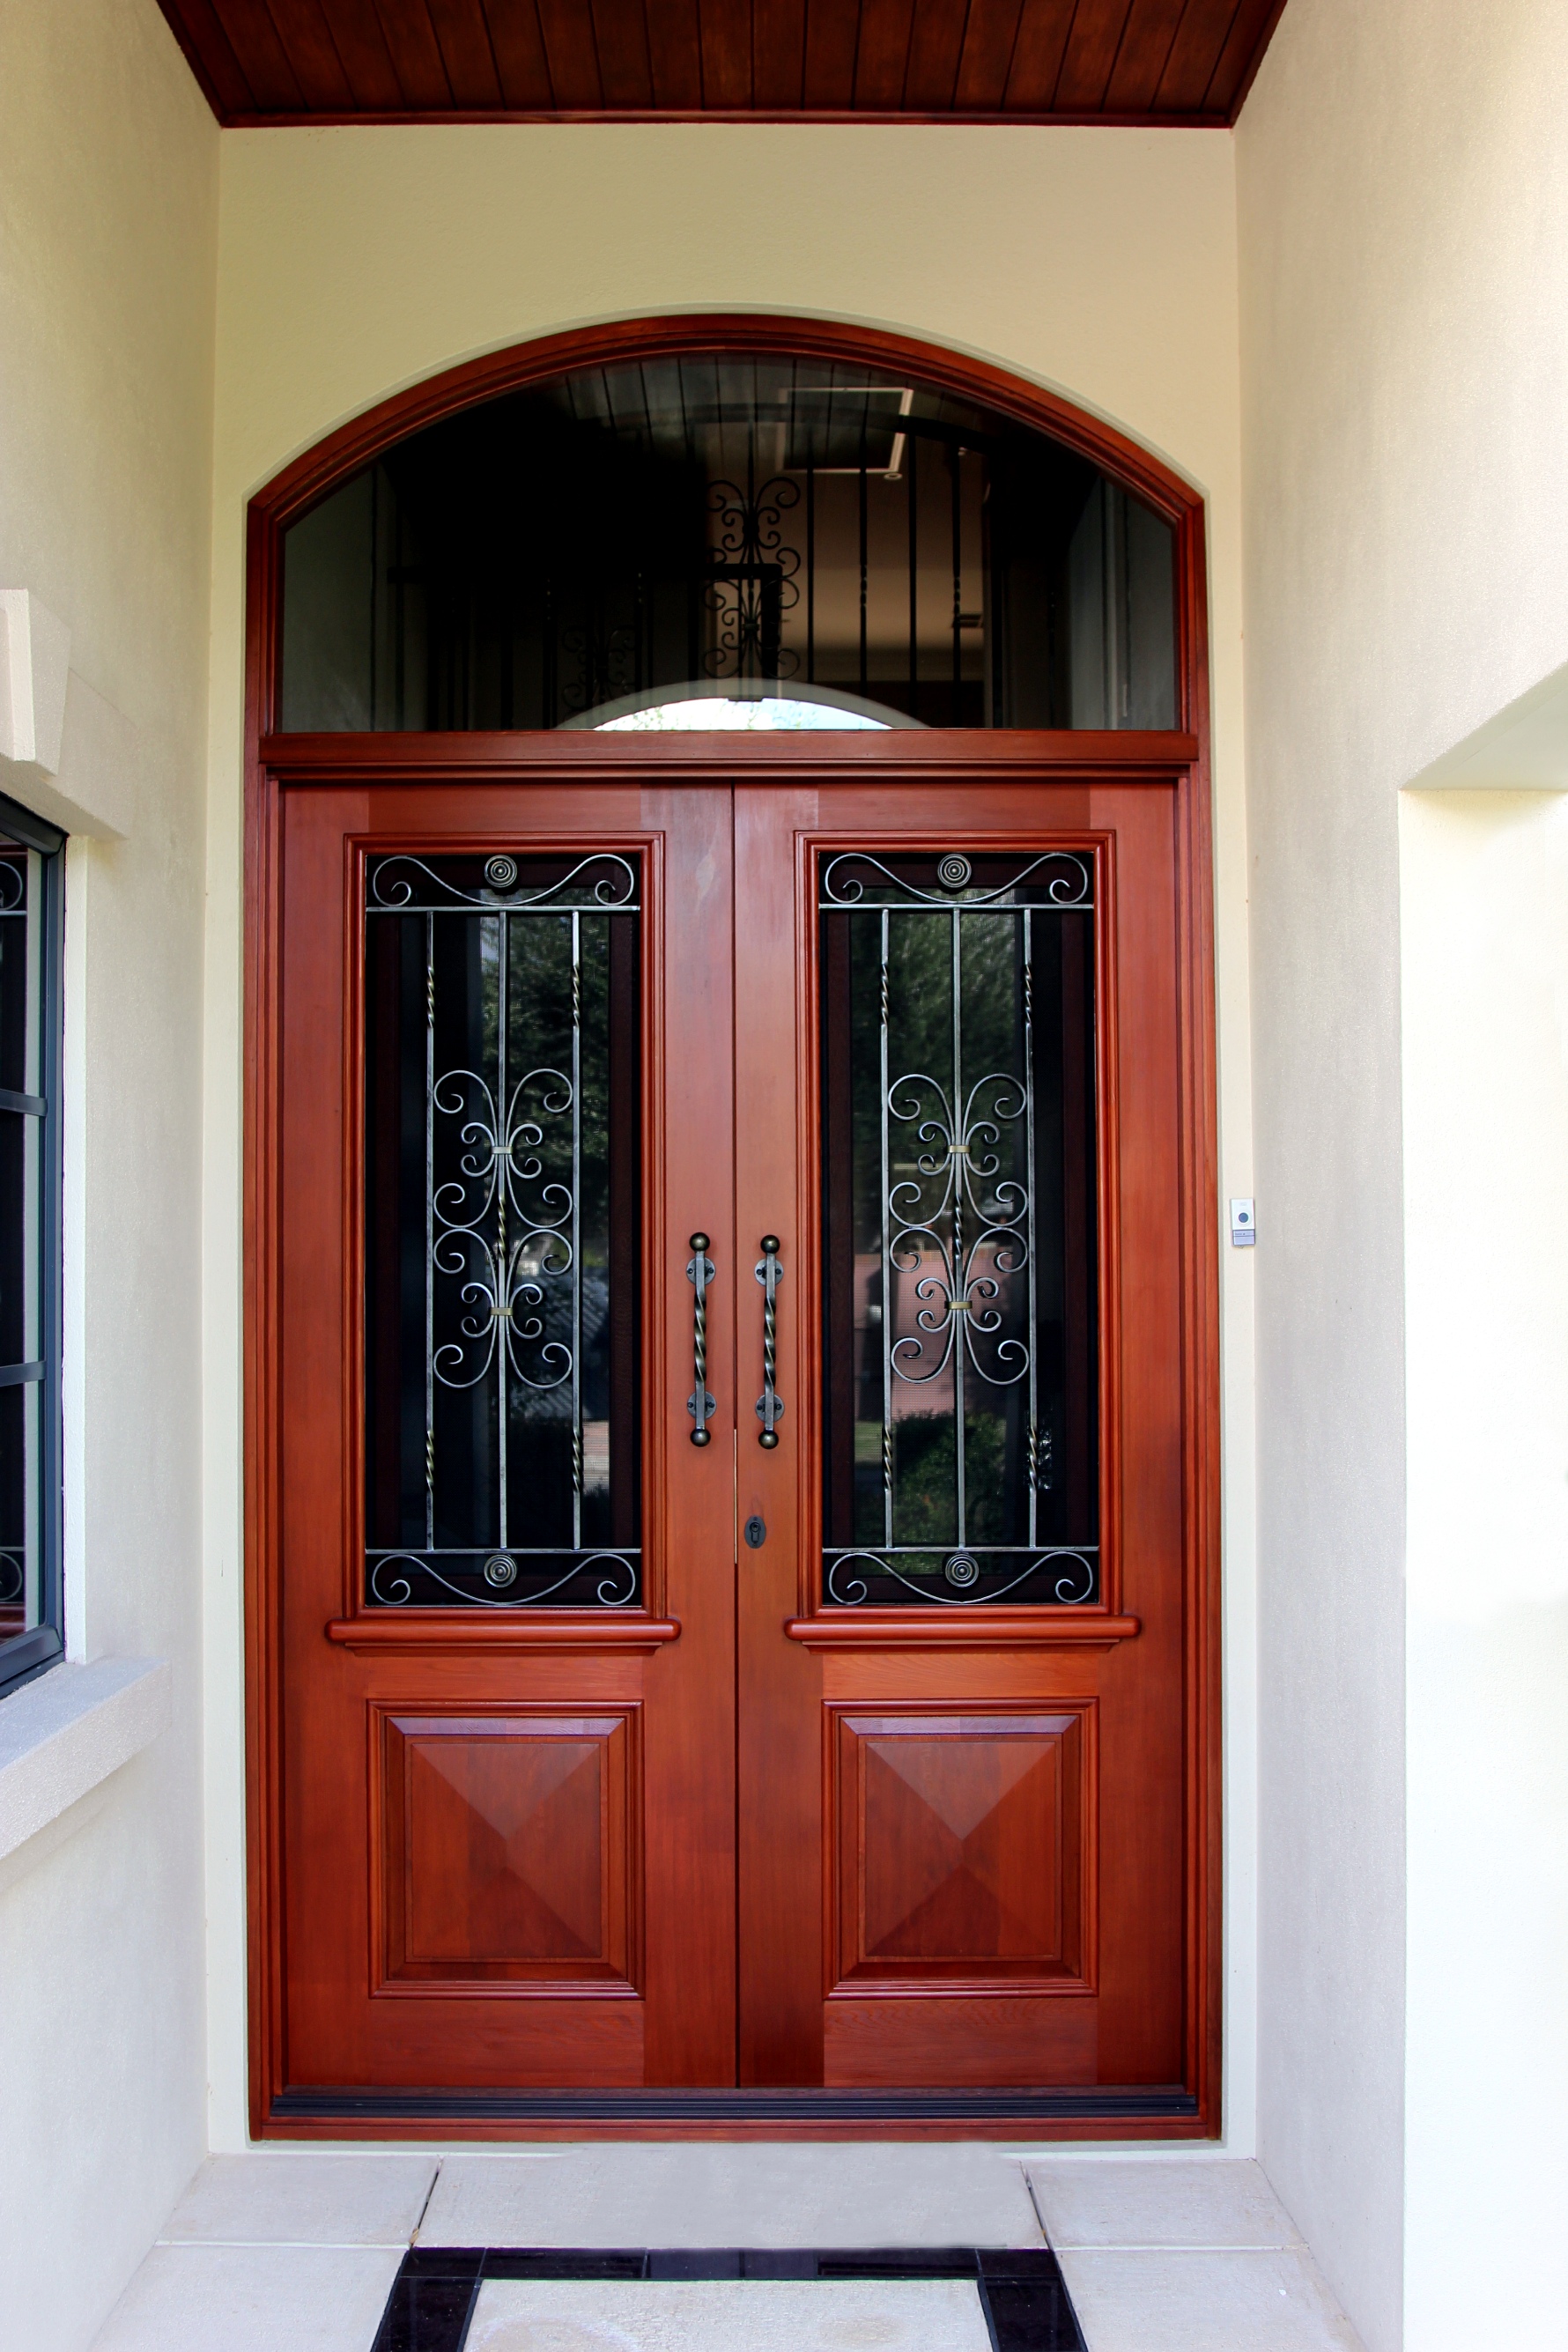 Chatsworth doors with arched transom window above